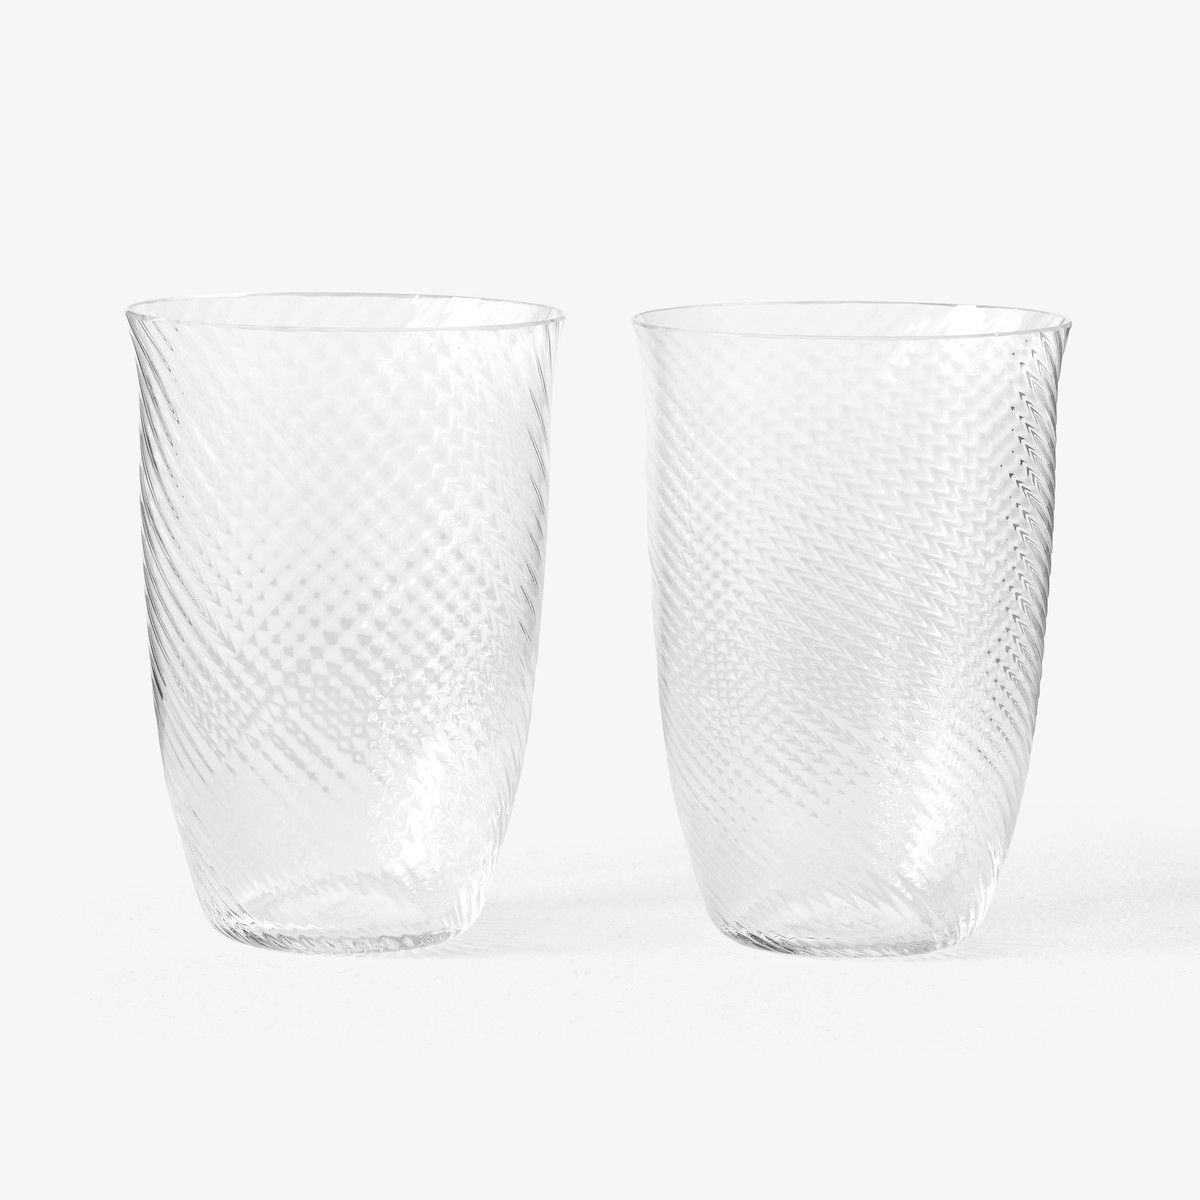 2 Glasses Collect 400ml Clear – SC61 - OFFER